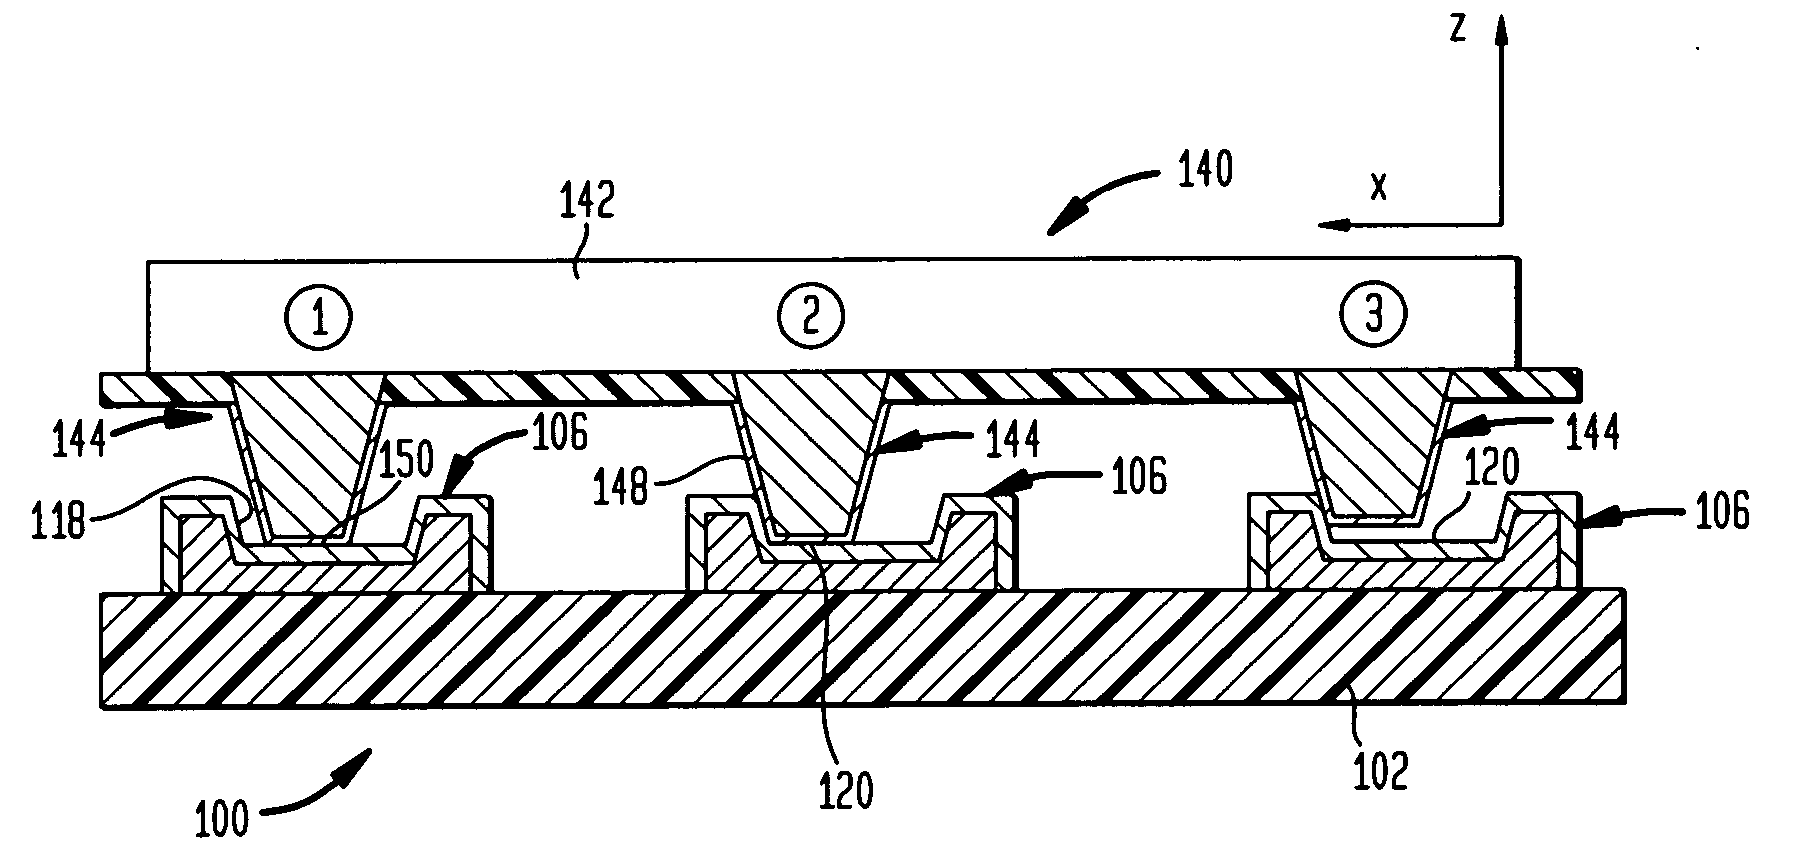 Methods and structures for electronic probing arrays